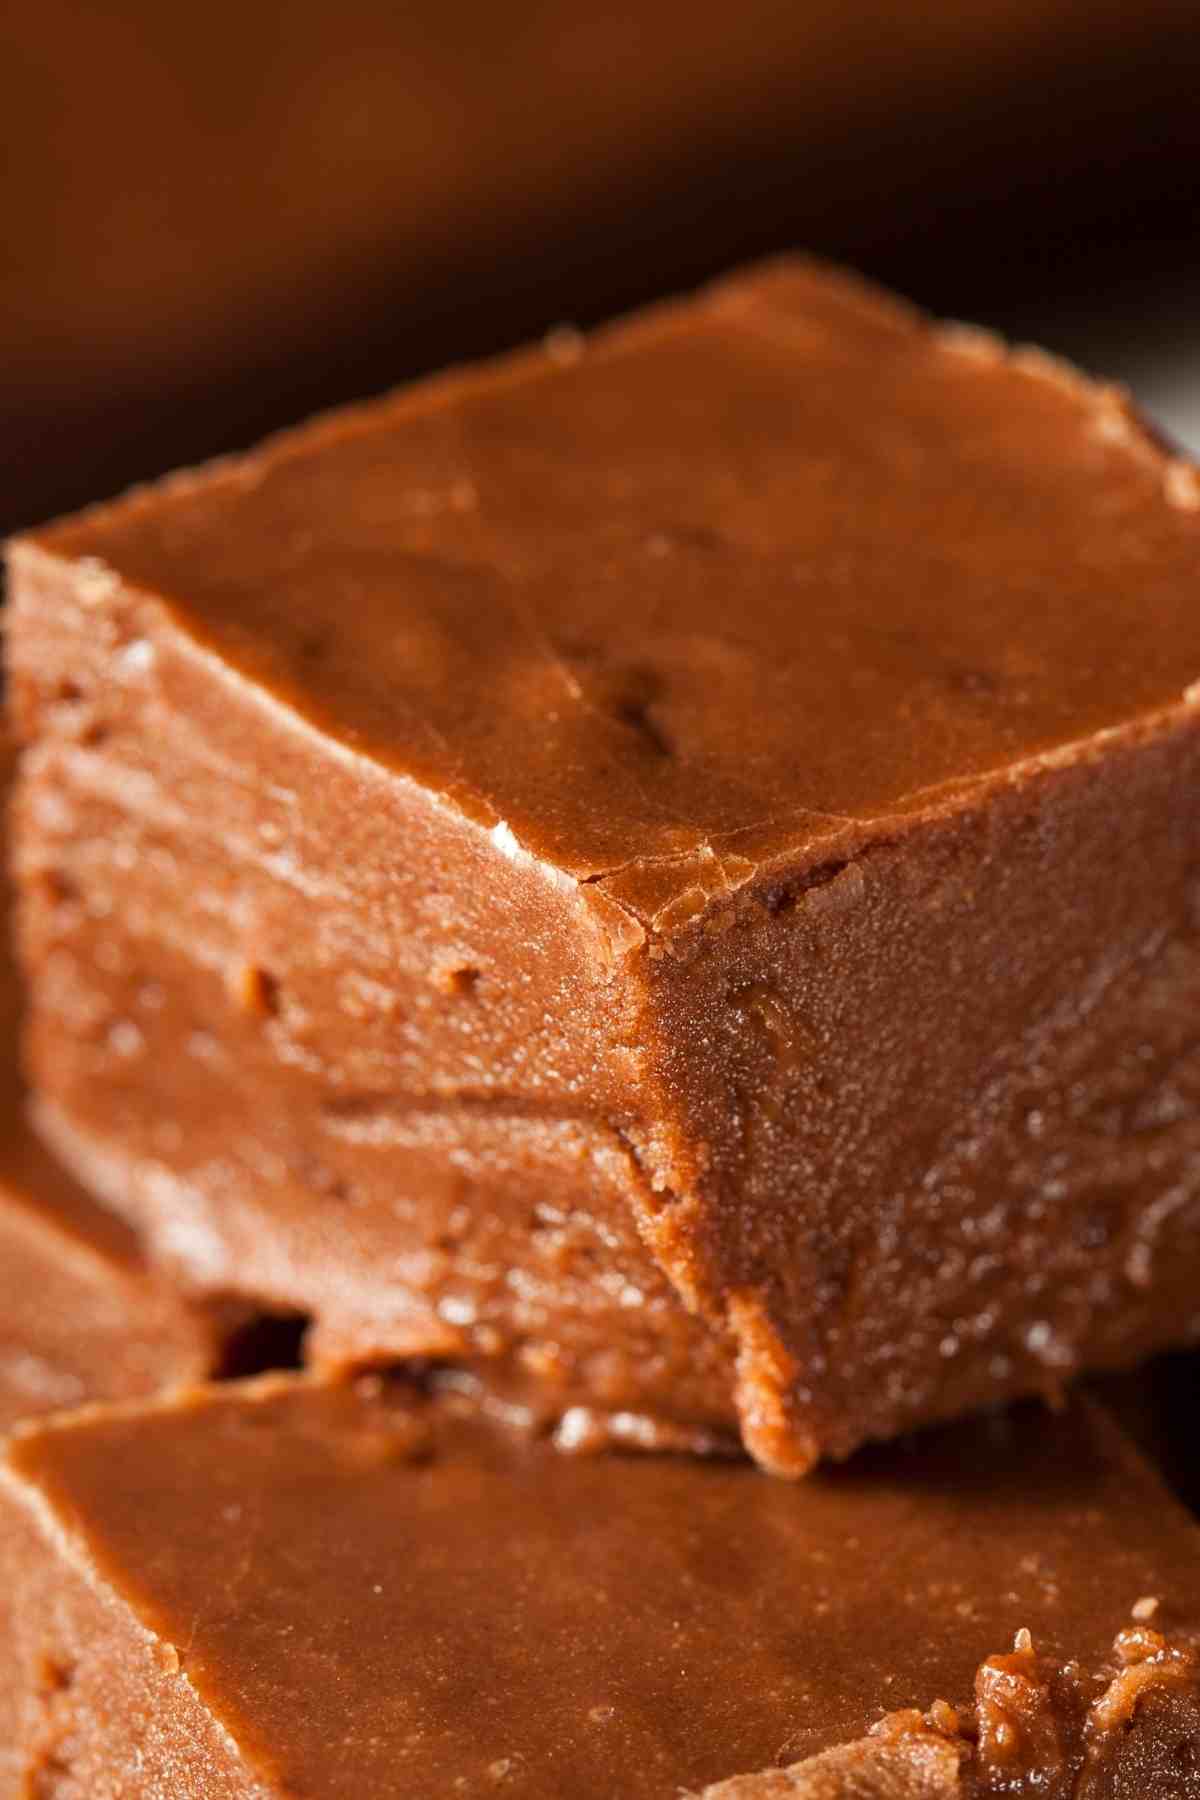 This simple fudge recipe is made without condensed milk. It’s sweet, creamy, chocolatey, and super easy to make.